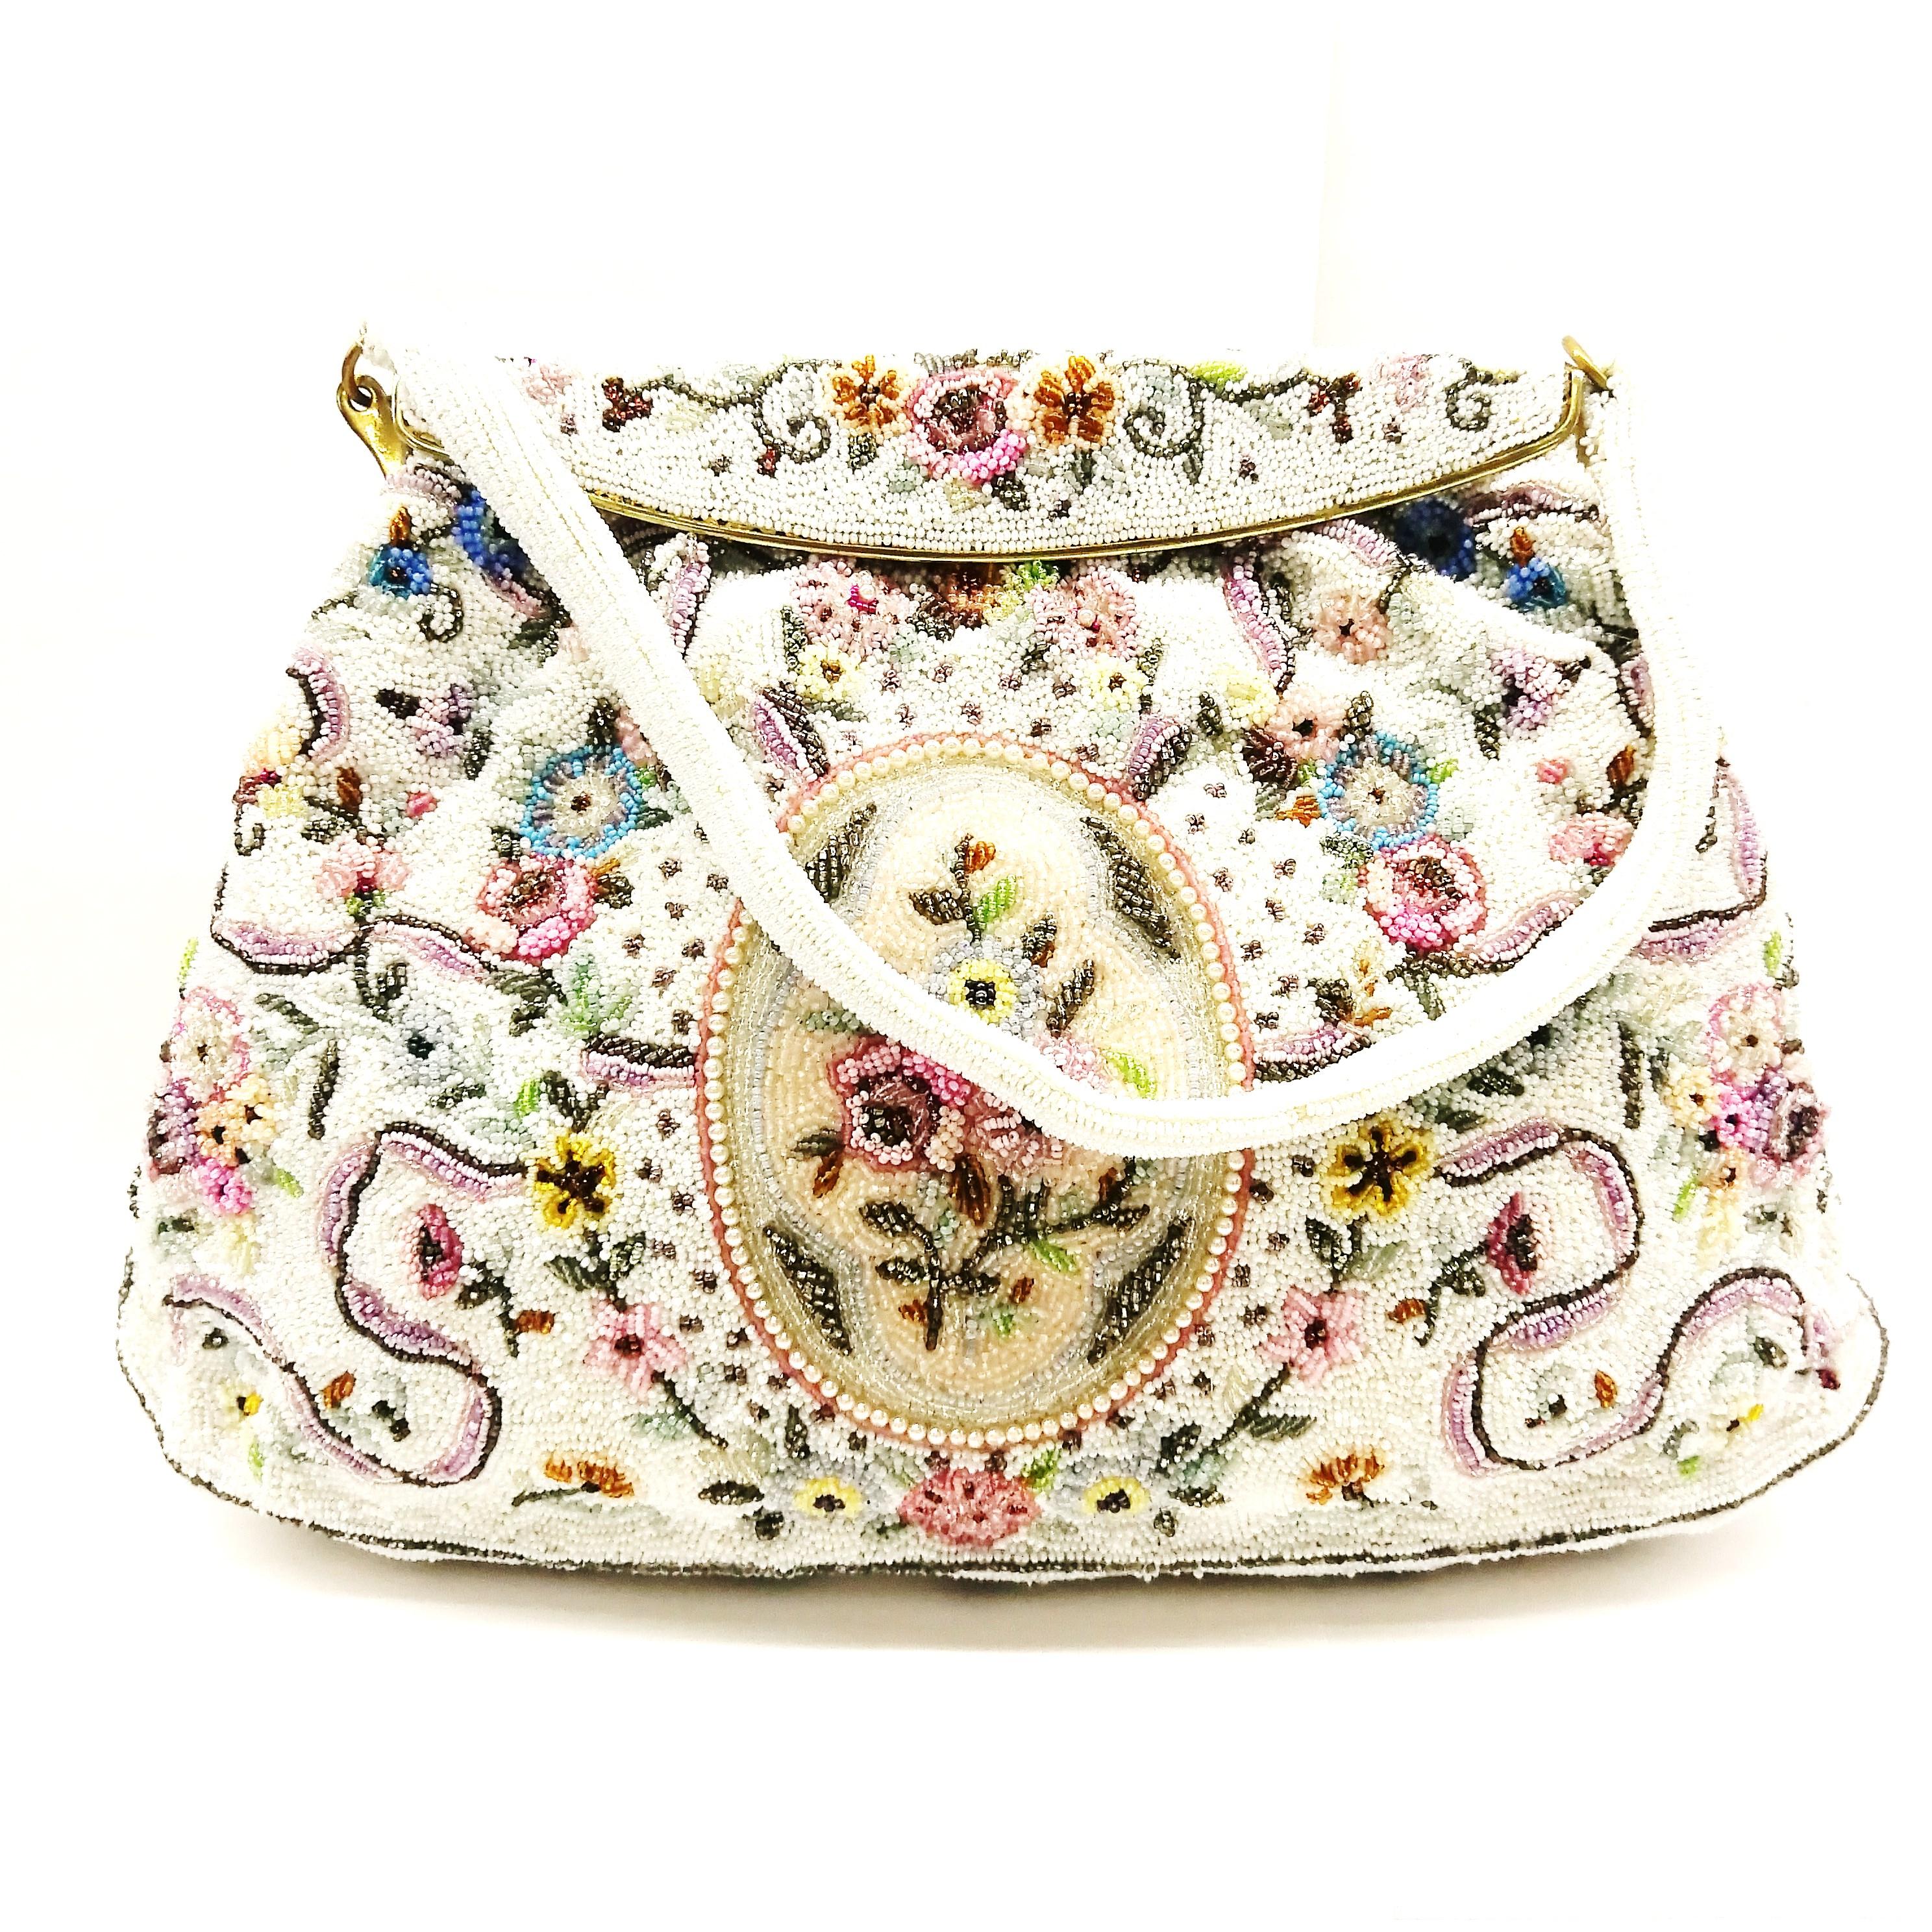 With highly detailed and intricate bead work characteristic of Morabito, this exquisite handbag  is elegant and eye catching. A floral pattern adorns the bag, in a range of delicate colours, sitting against a white background. It has a rigid beaded